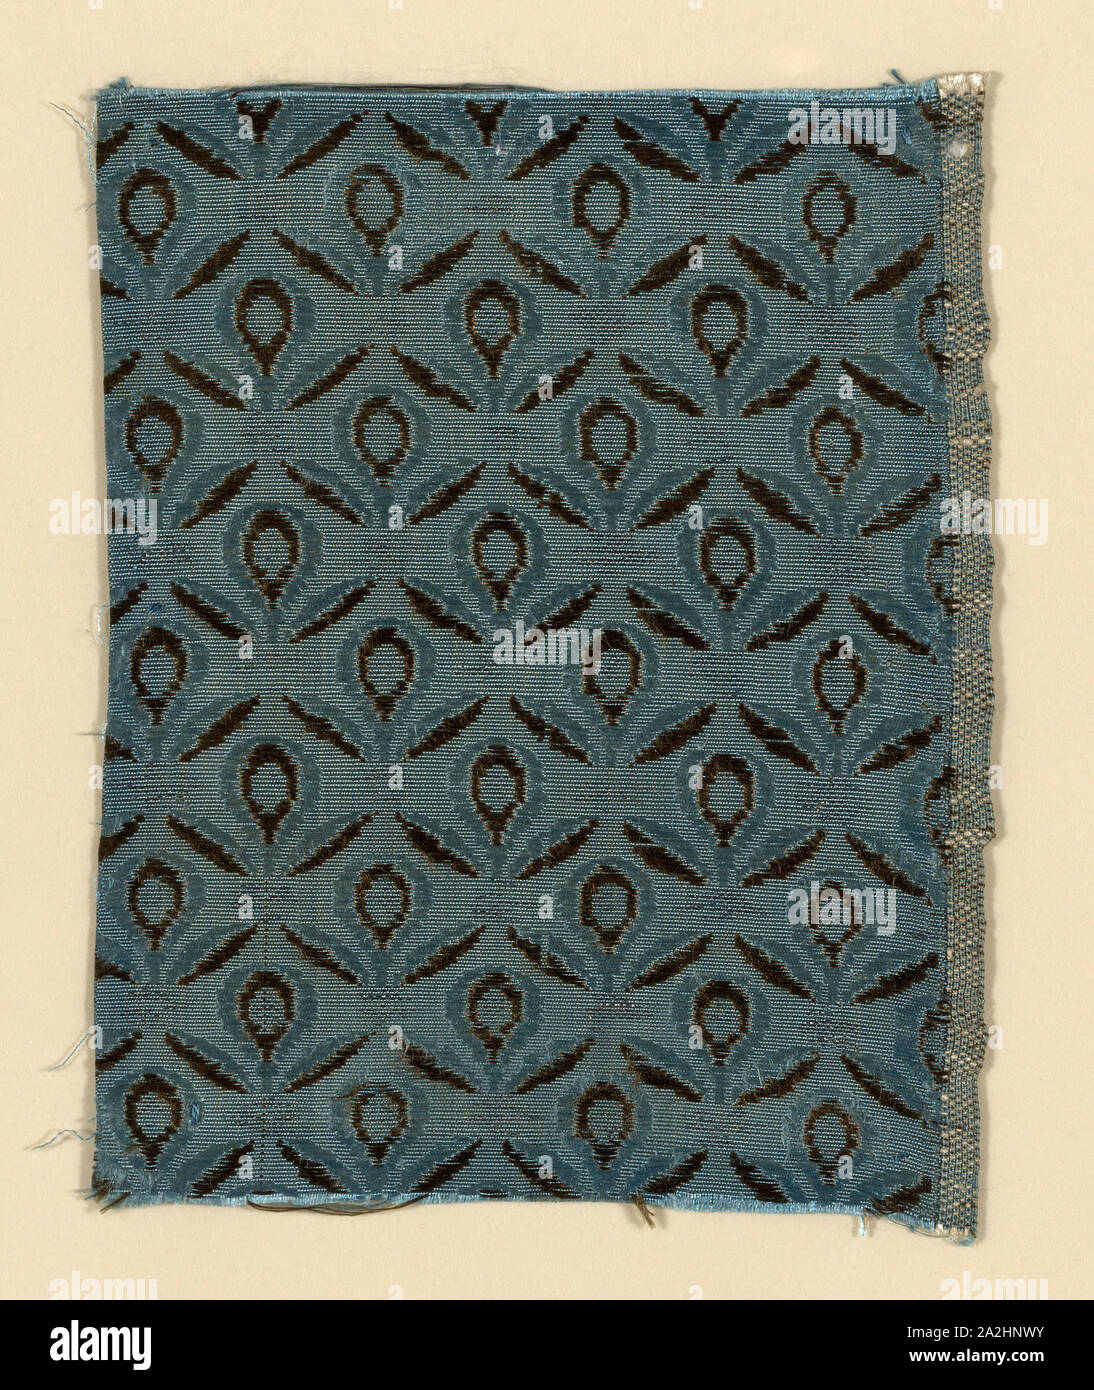 Fragment, 1775/1800, Spain, Silk and silvered-metal strip, warp-faced weft-ribbed plain weave with supplementary patterning wefts, 14 x 10.6 cm (5 1/2 x 4 3/16 in Stock Photo